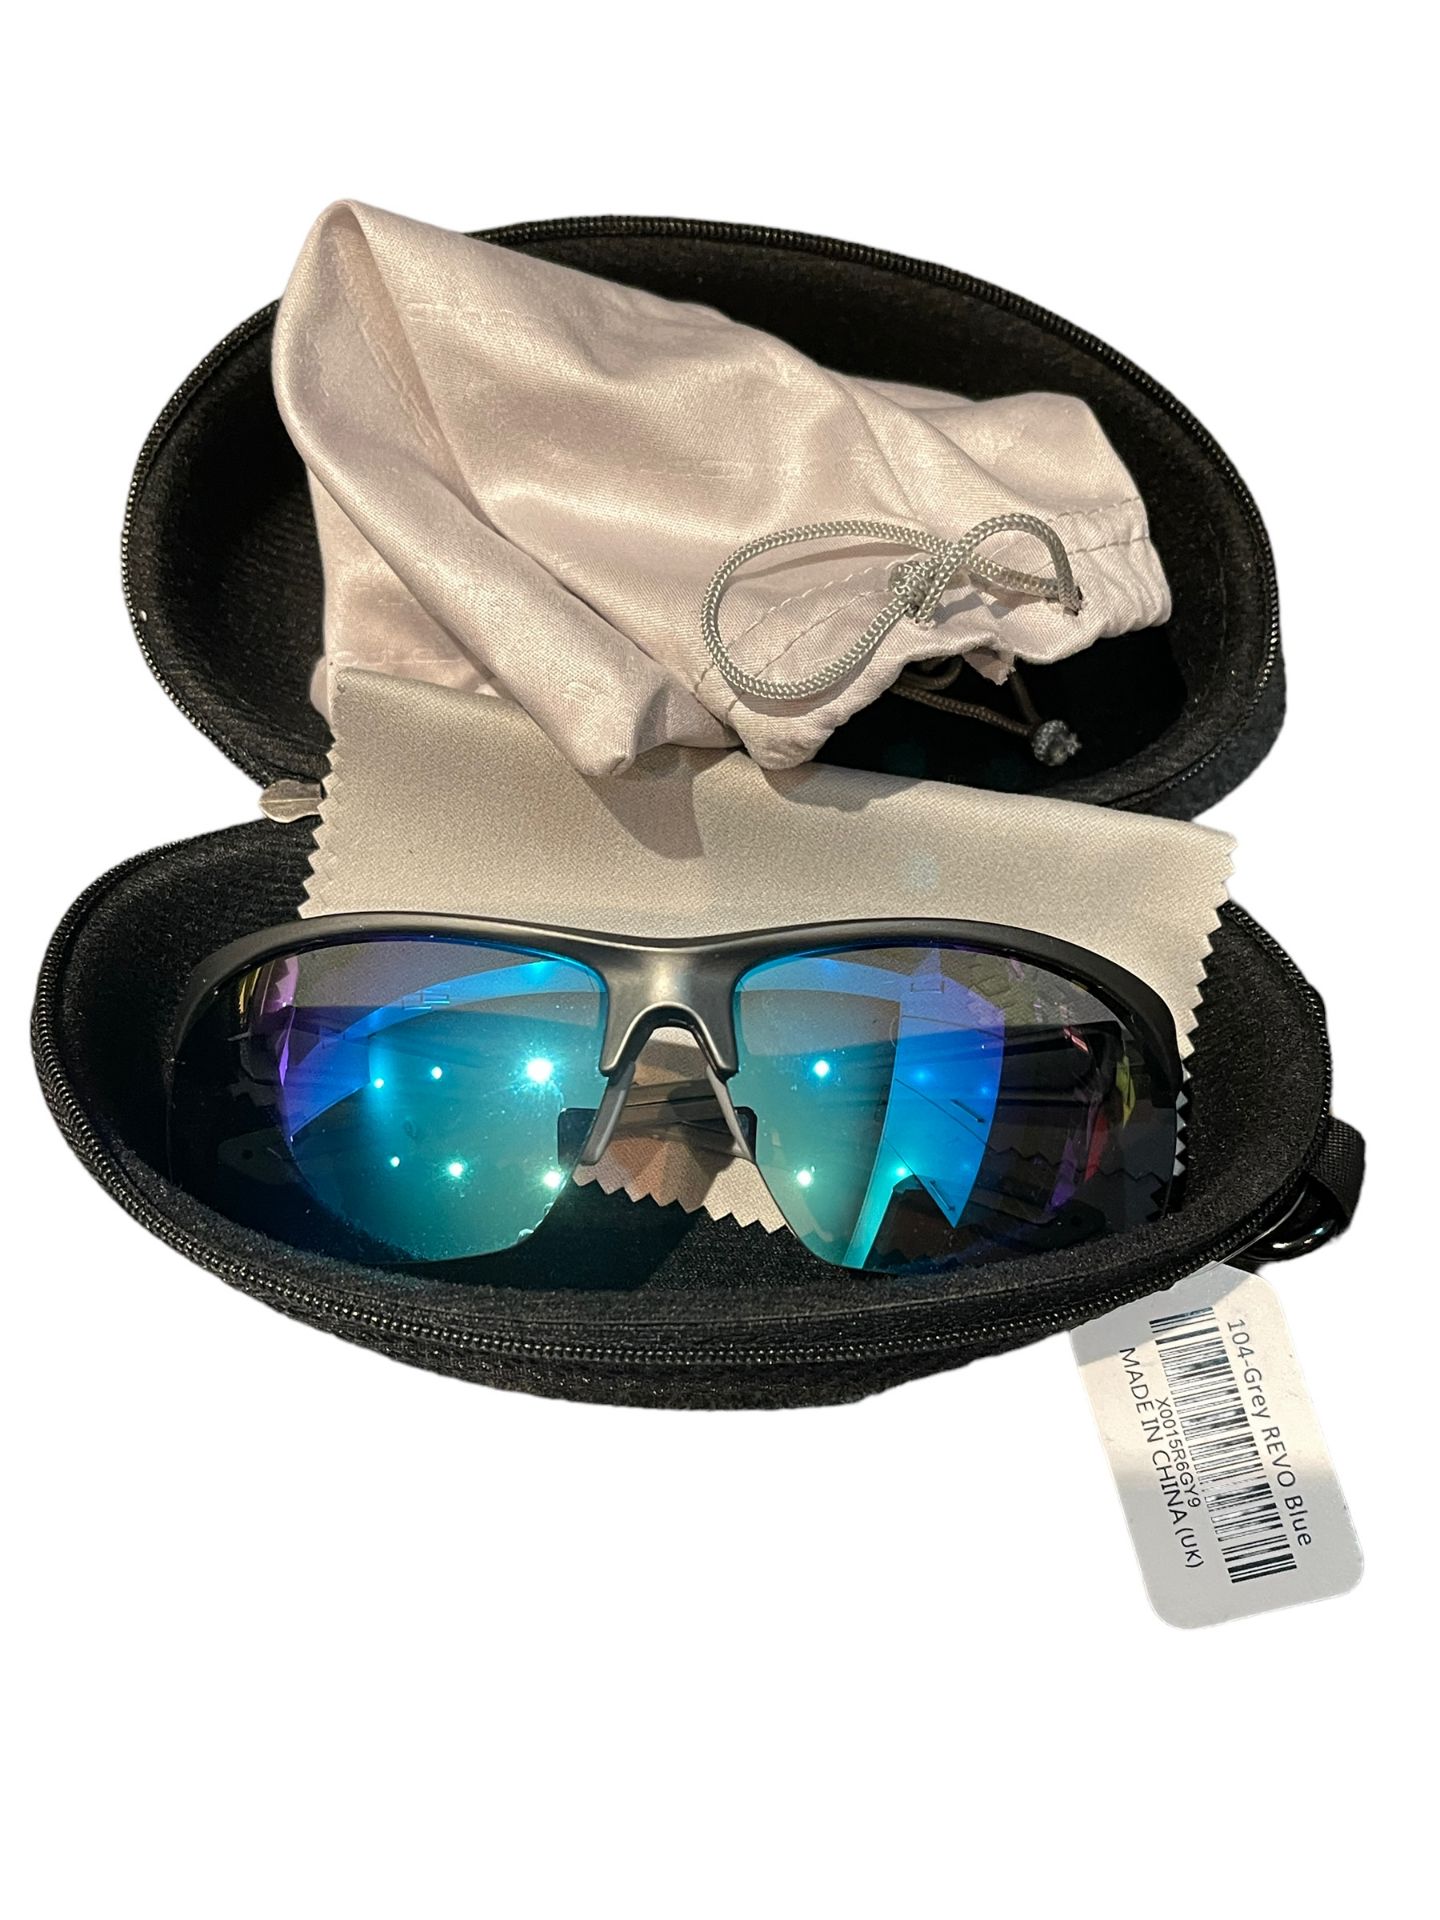 Snowledge Sunglasses' new end-of-line stock from private charter grey